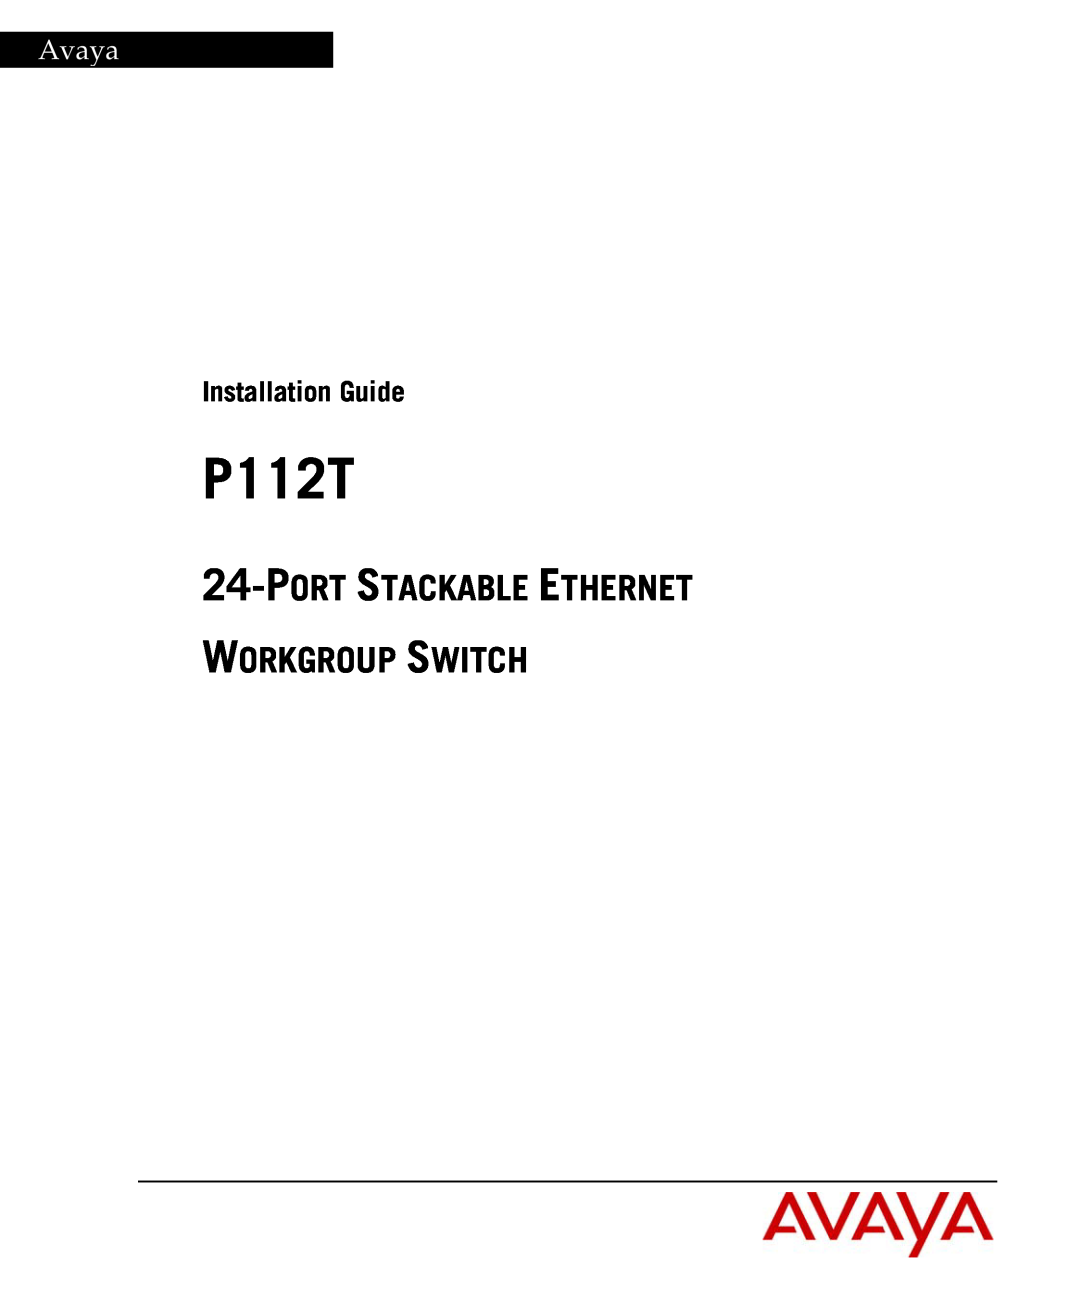 Avaya P112T manual Avaya, Port Stackable Ethernet Workgroup Switch, Installation Guide 